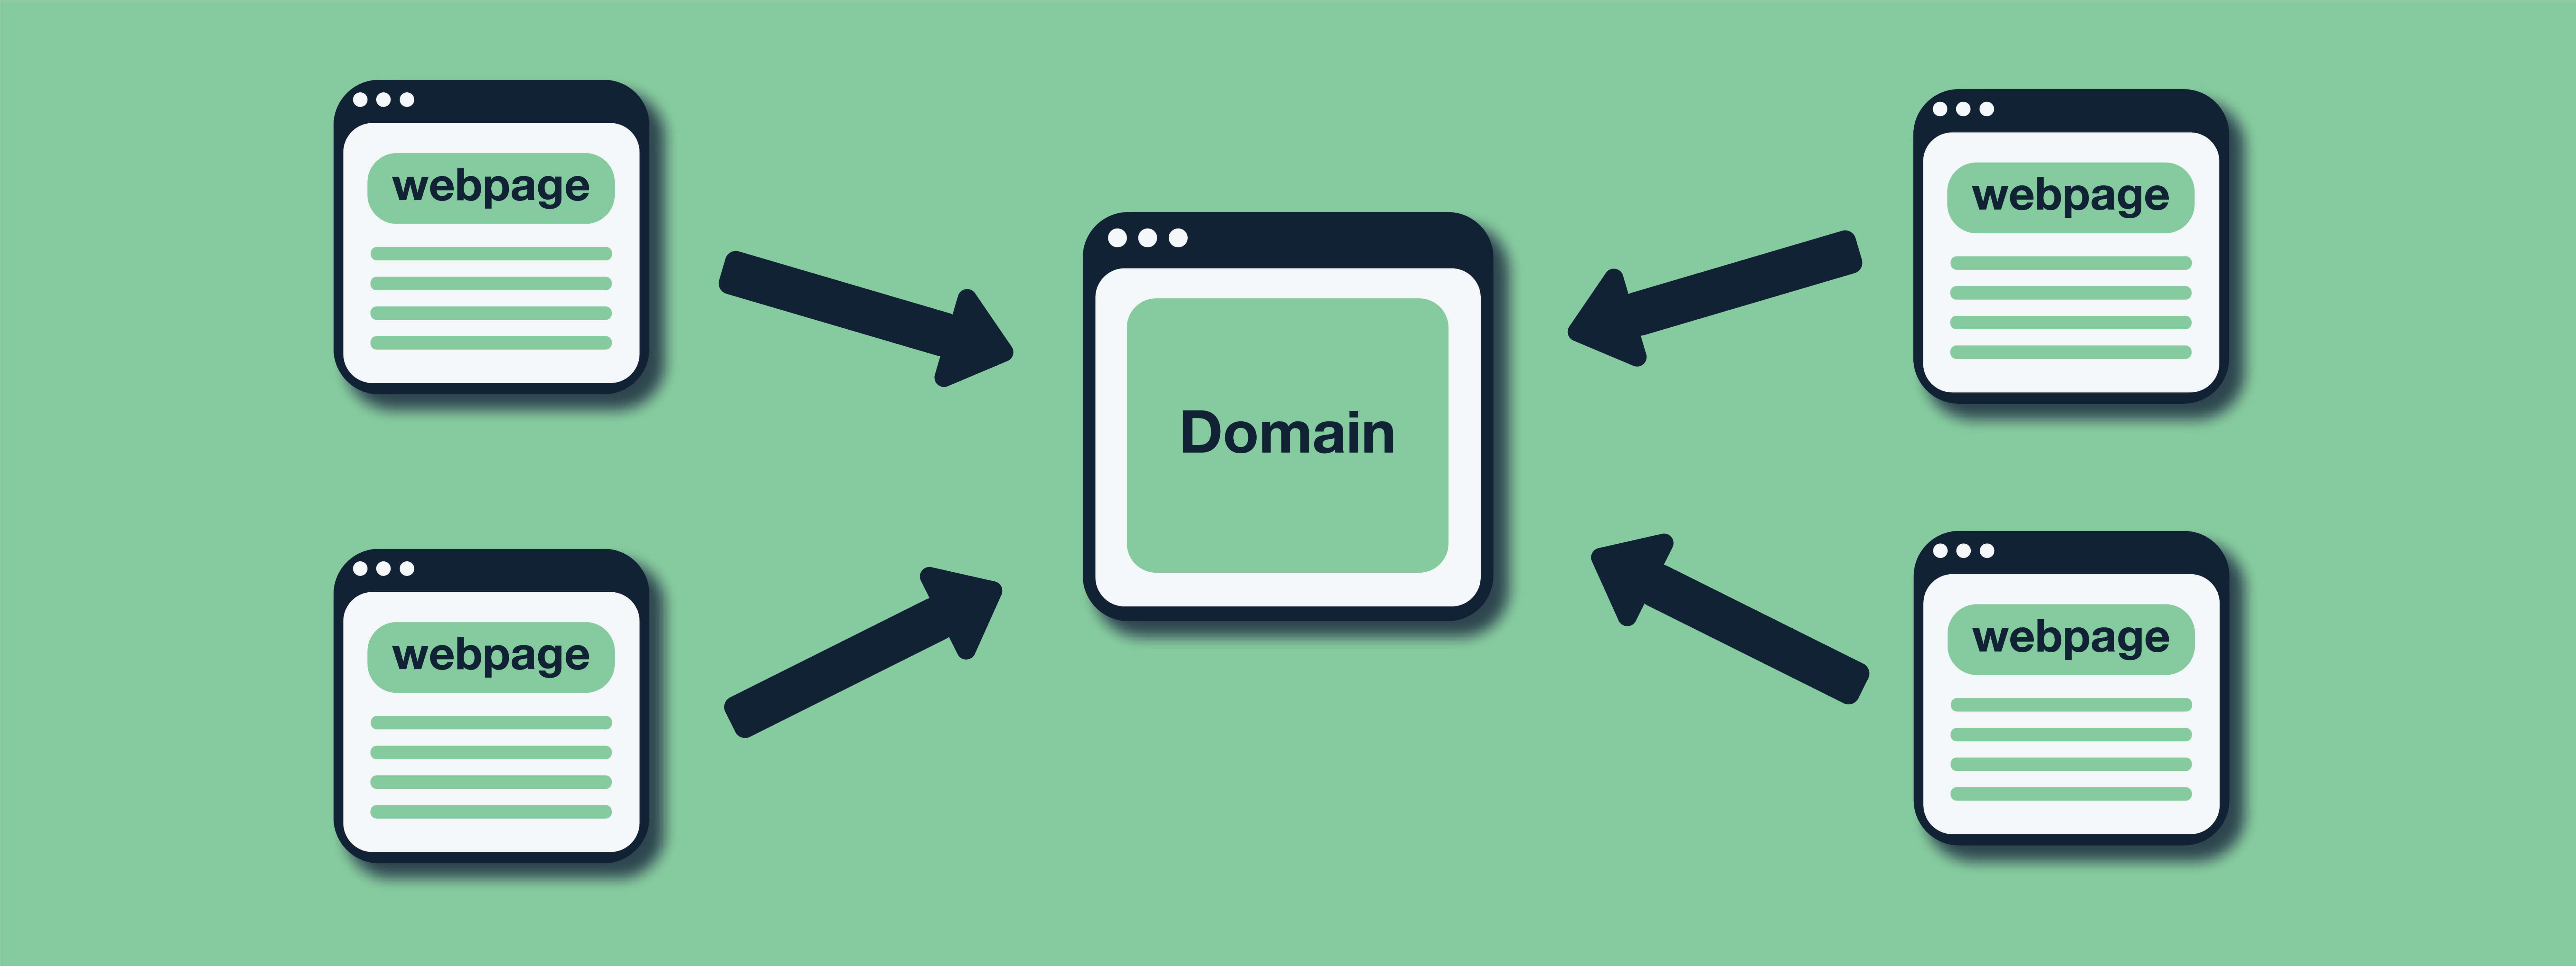 301nRedirect a full domain to a new domain